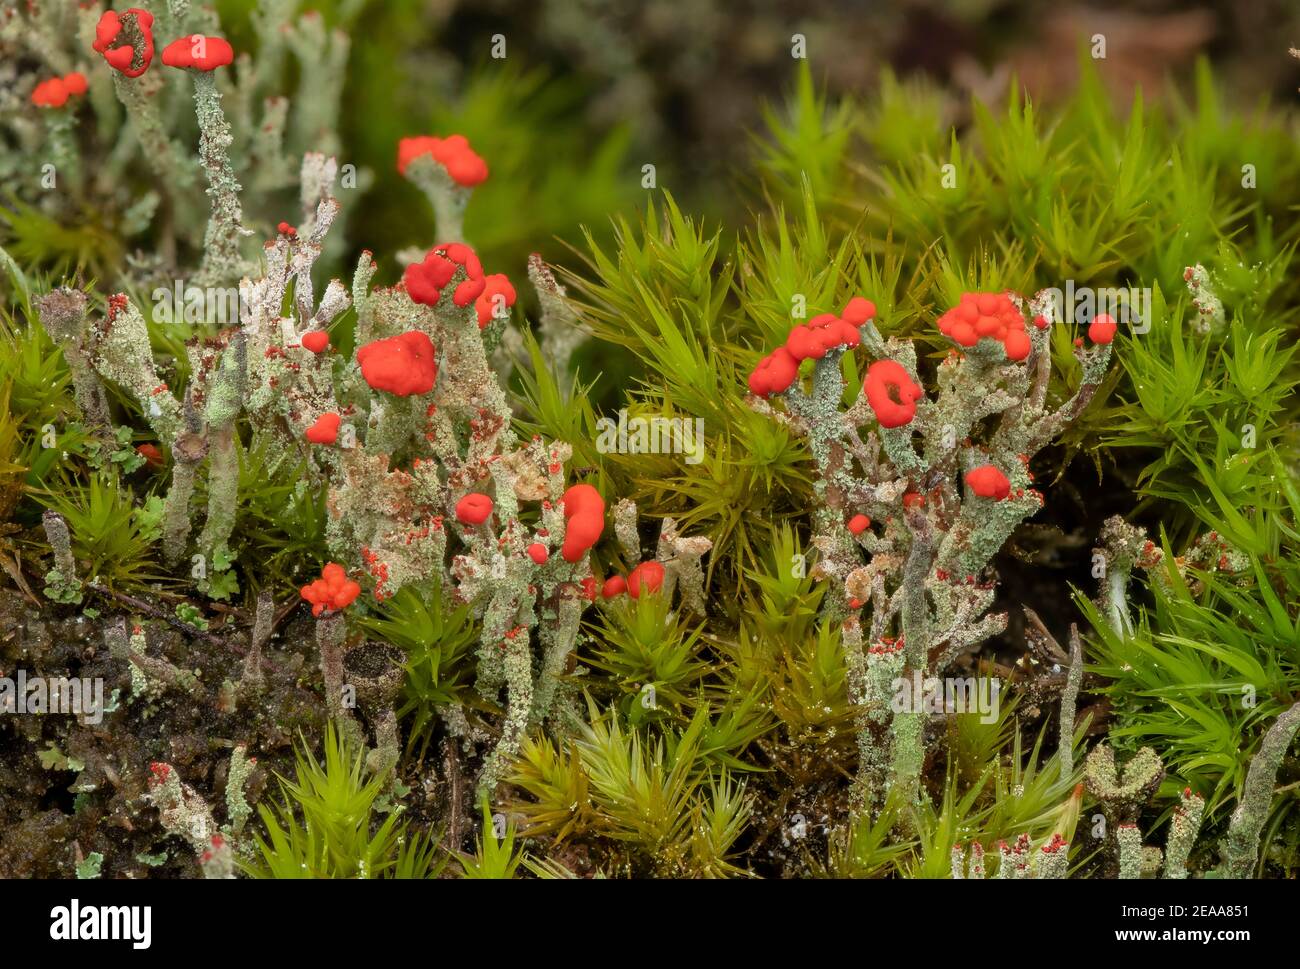 Cladonia diversa - a red-tipped lichen growing on heathland, Dorset. Stock Photo